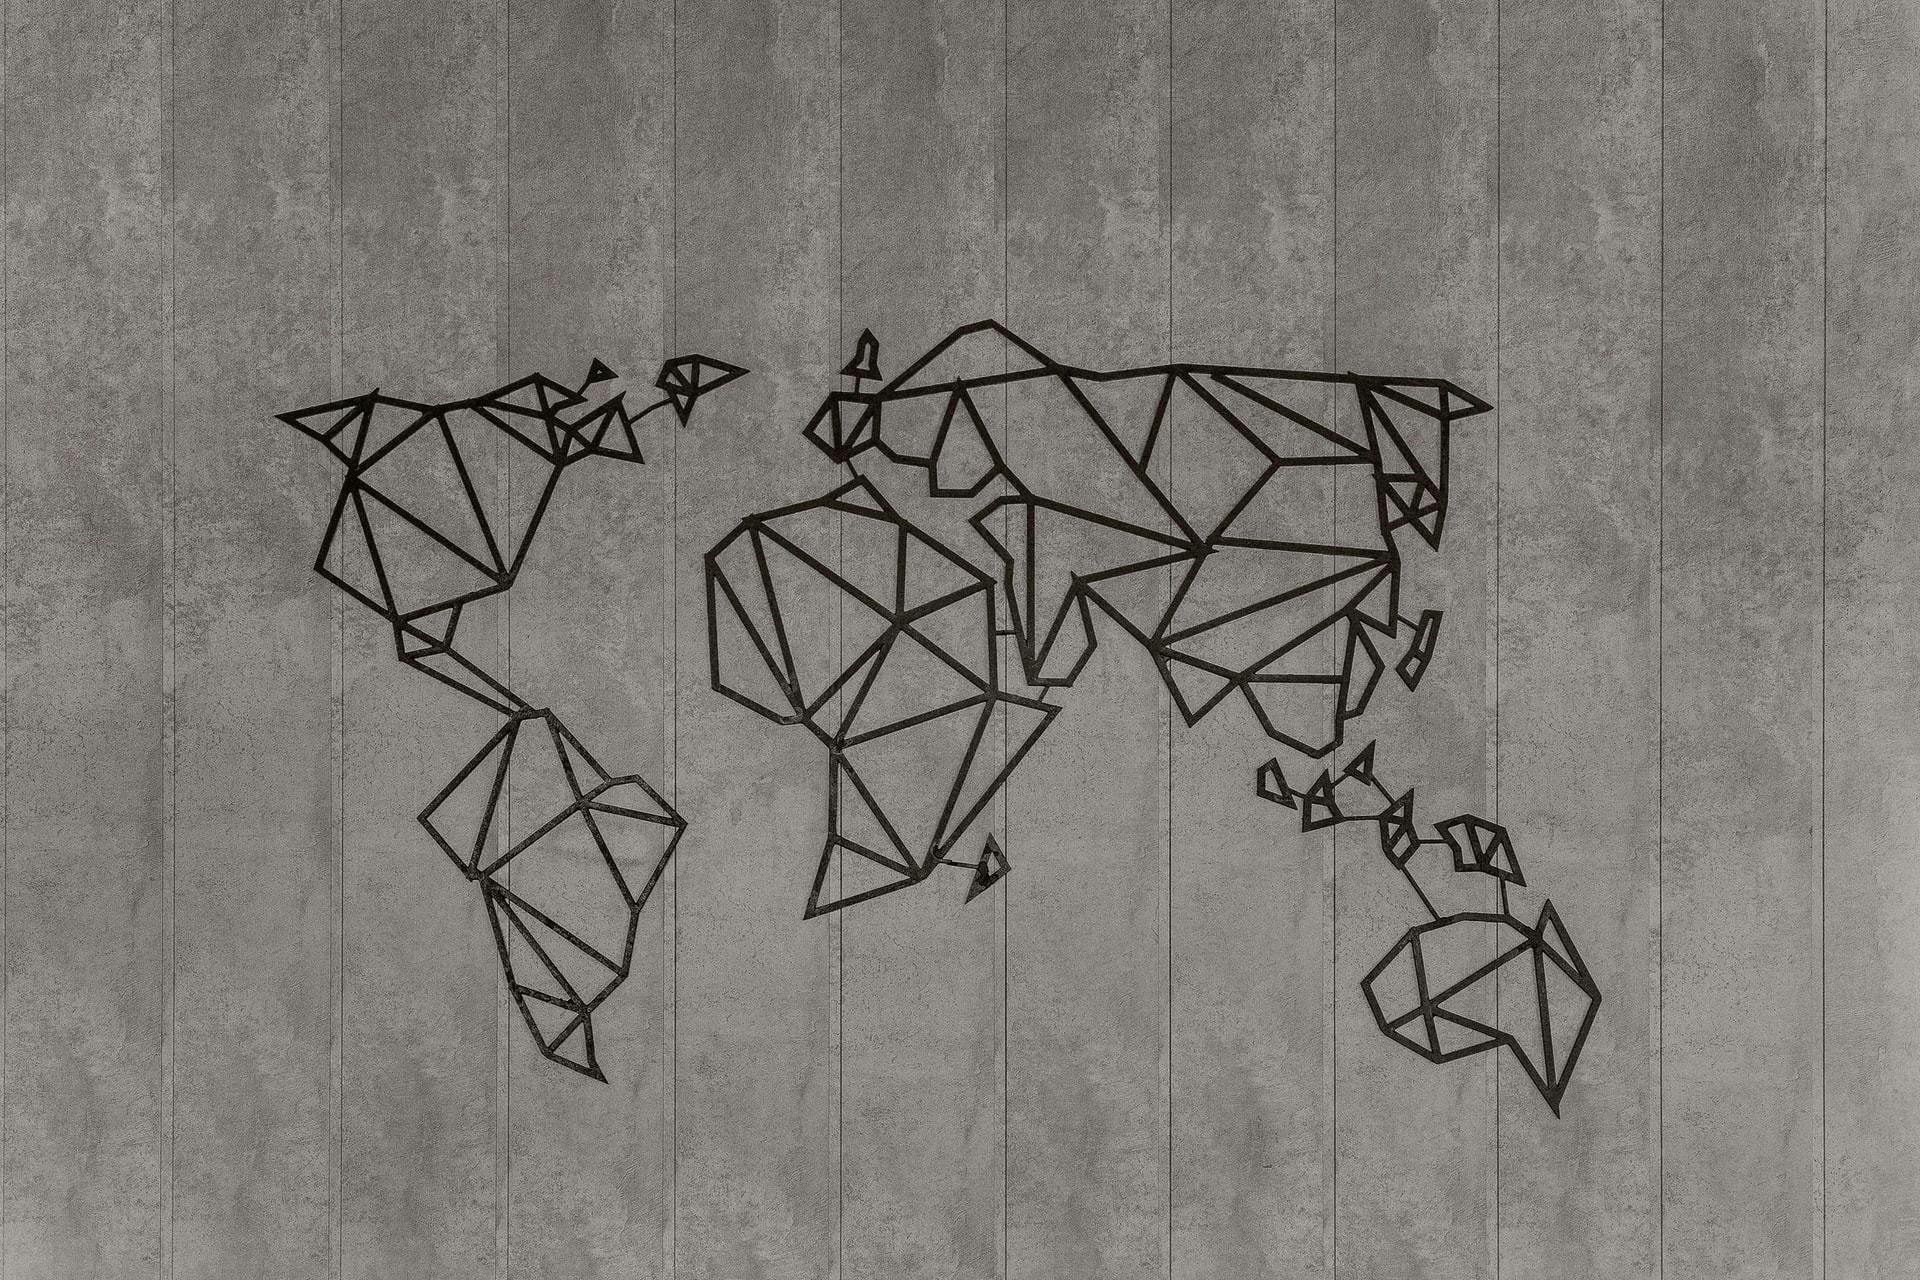 An abstract rendering of world map where continents are represented as black unfilled polygons split into polygons set against a gray textured background